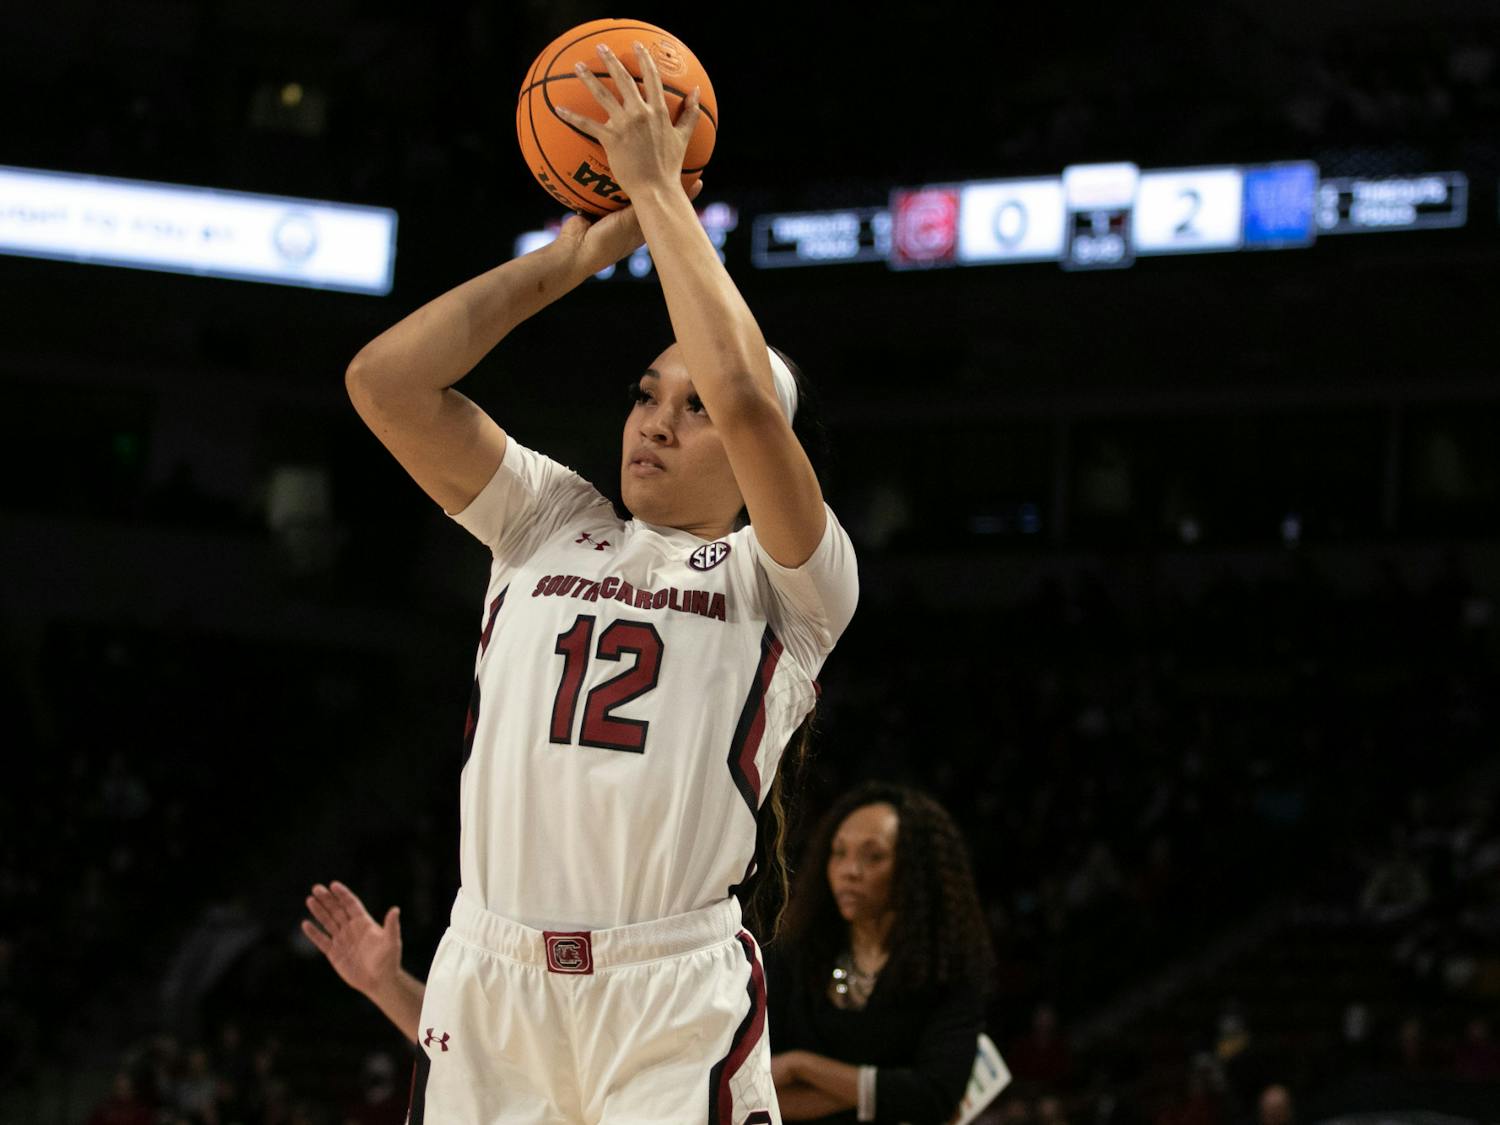 Senior guard Brea Beal shoots a three-pointer to make the score 3-2 in the first quarter against Kentucky at Colonial Life Arena on Feb. 2, 2023. The South Carolina Gamecocks beat the Wildcats for the second time this season 87-69.